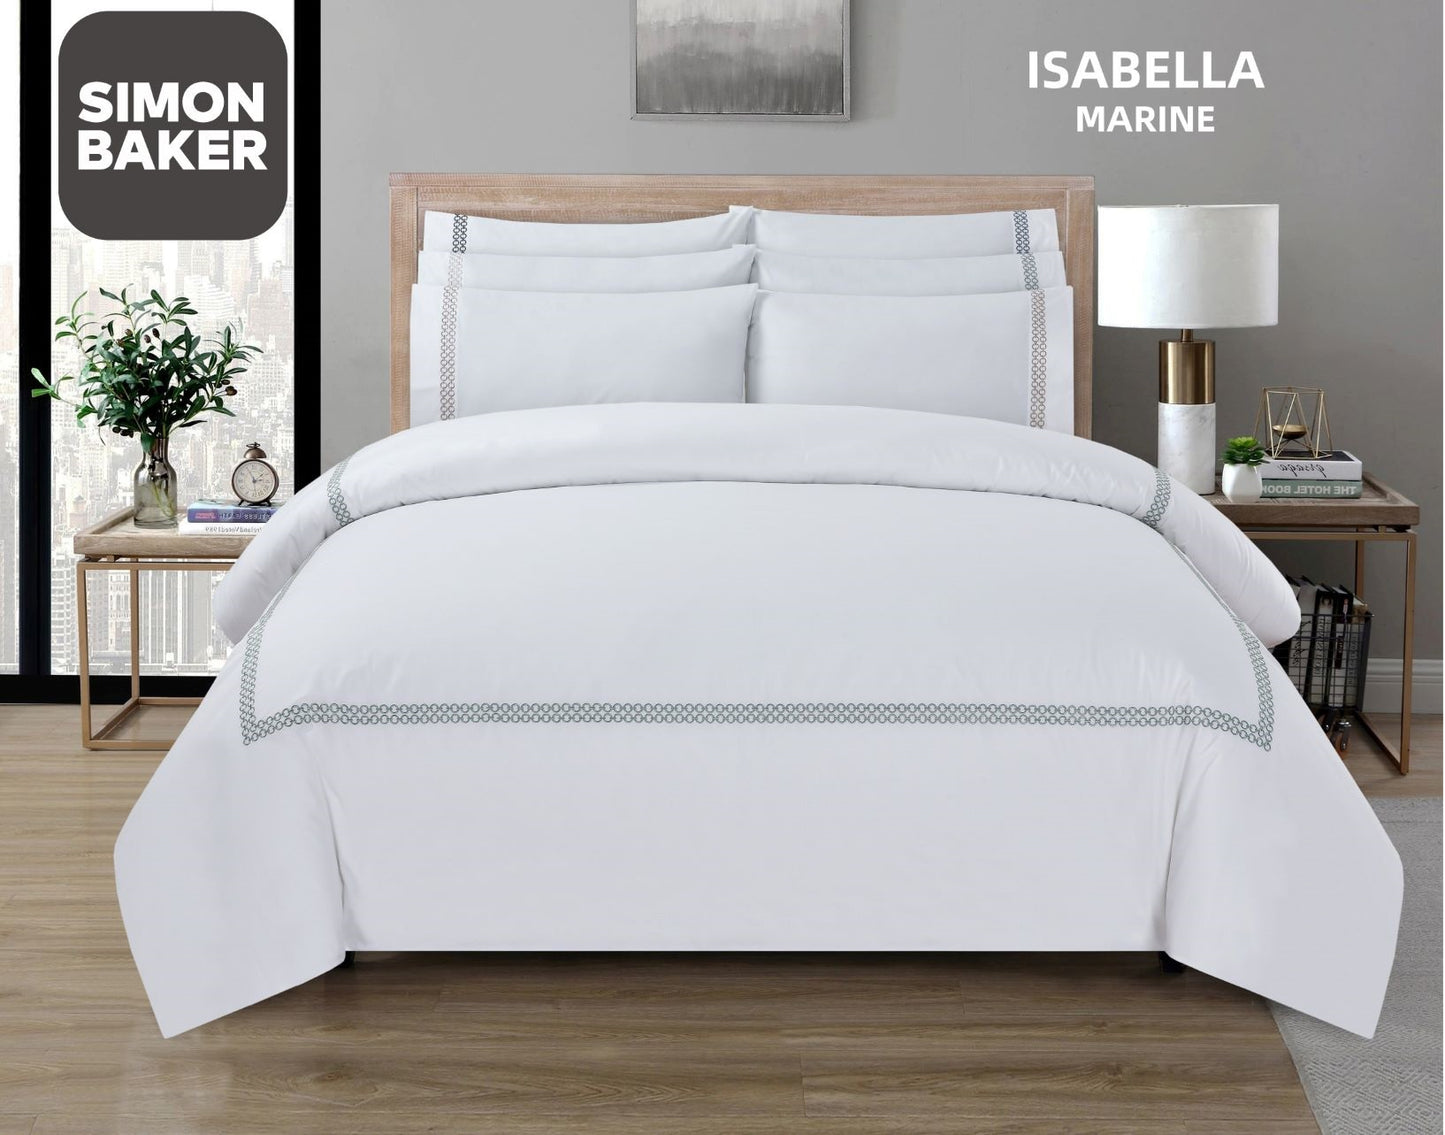 Simon Baker | T200 Cotton Percale Embroidered Duvet Cover Set - Isabella Marine (Various Sizes)